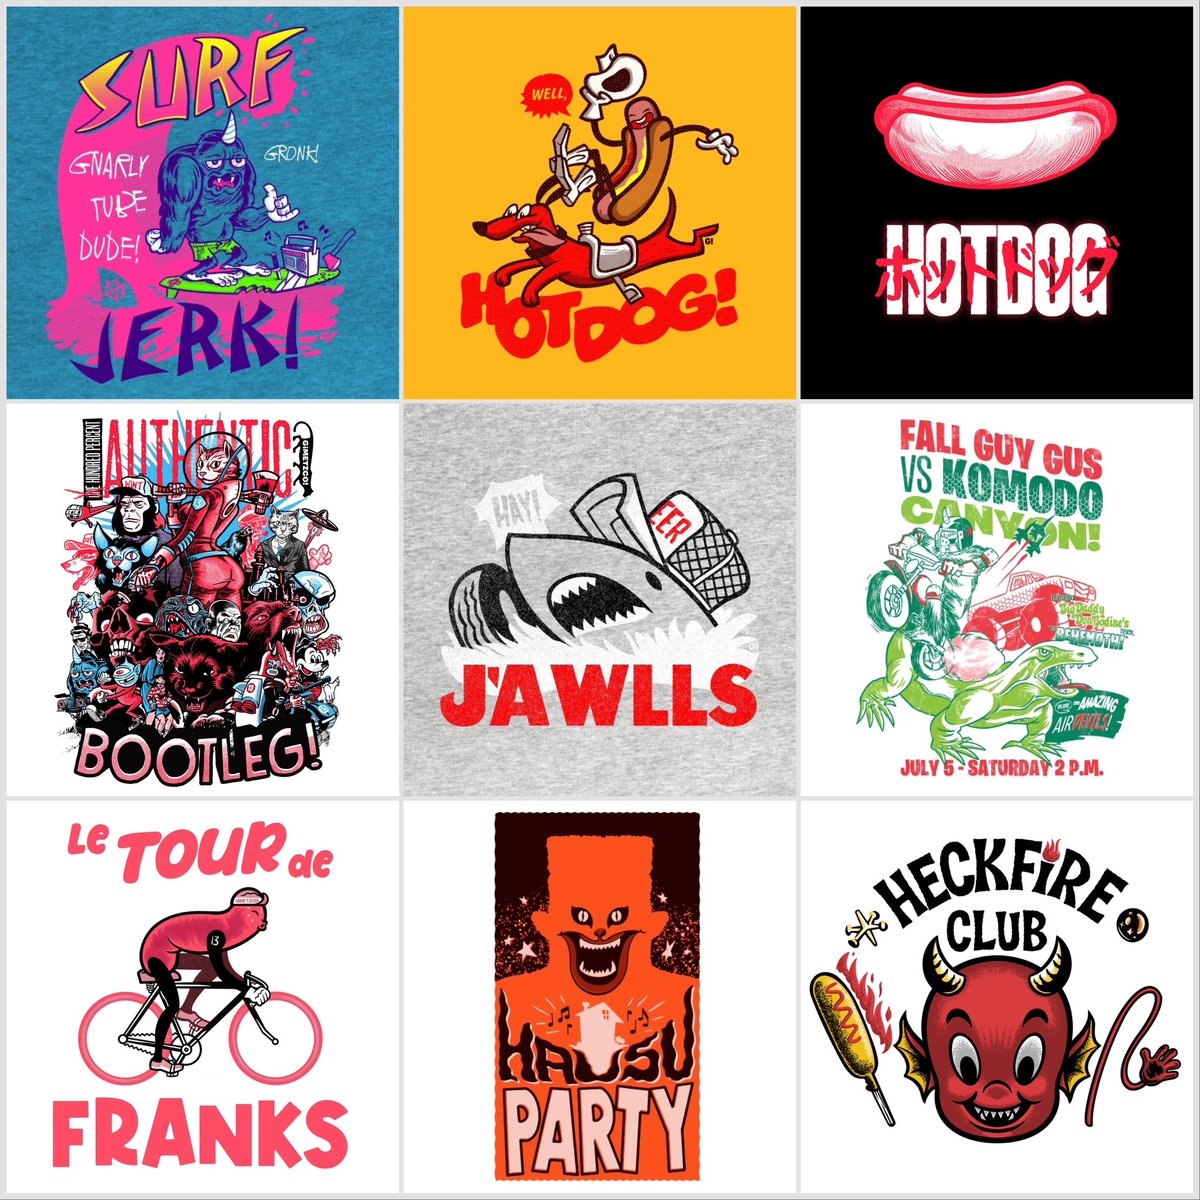 I live where it’s summer year round, so you’ll find a lot of my work reflects that to some degree…#sale’s on! Get yer #summer gear here! teepublic.com/user/gimetzco #hotdog #jaws #surfing #akira #tourdefrance #hausu #houseparty #hellfireclub #stuntbike